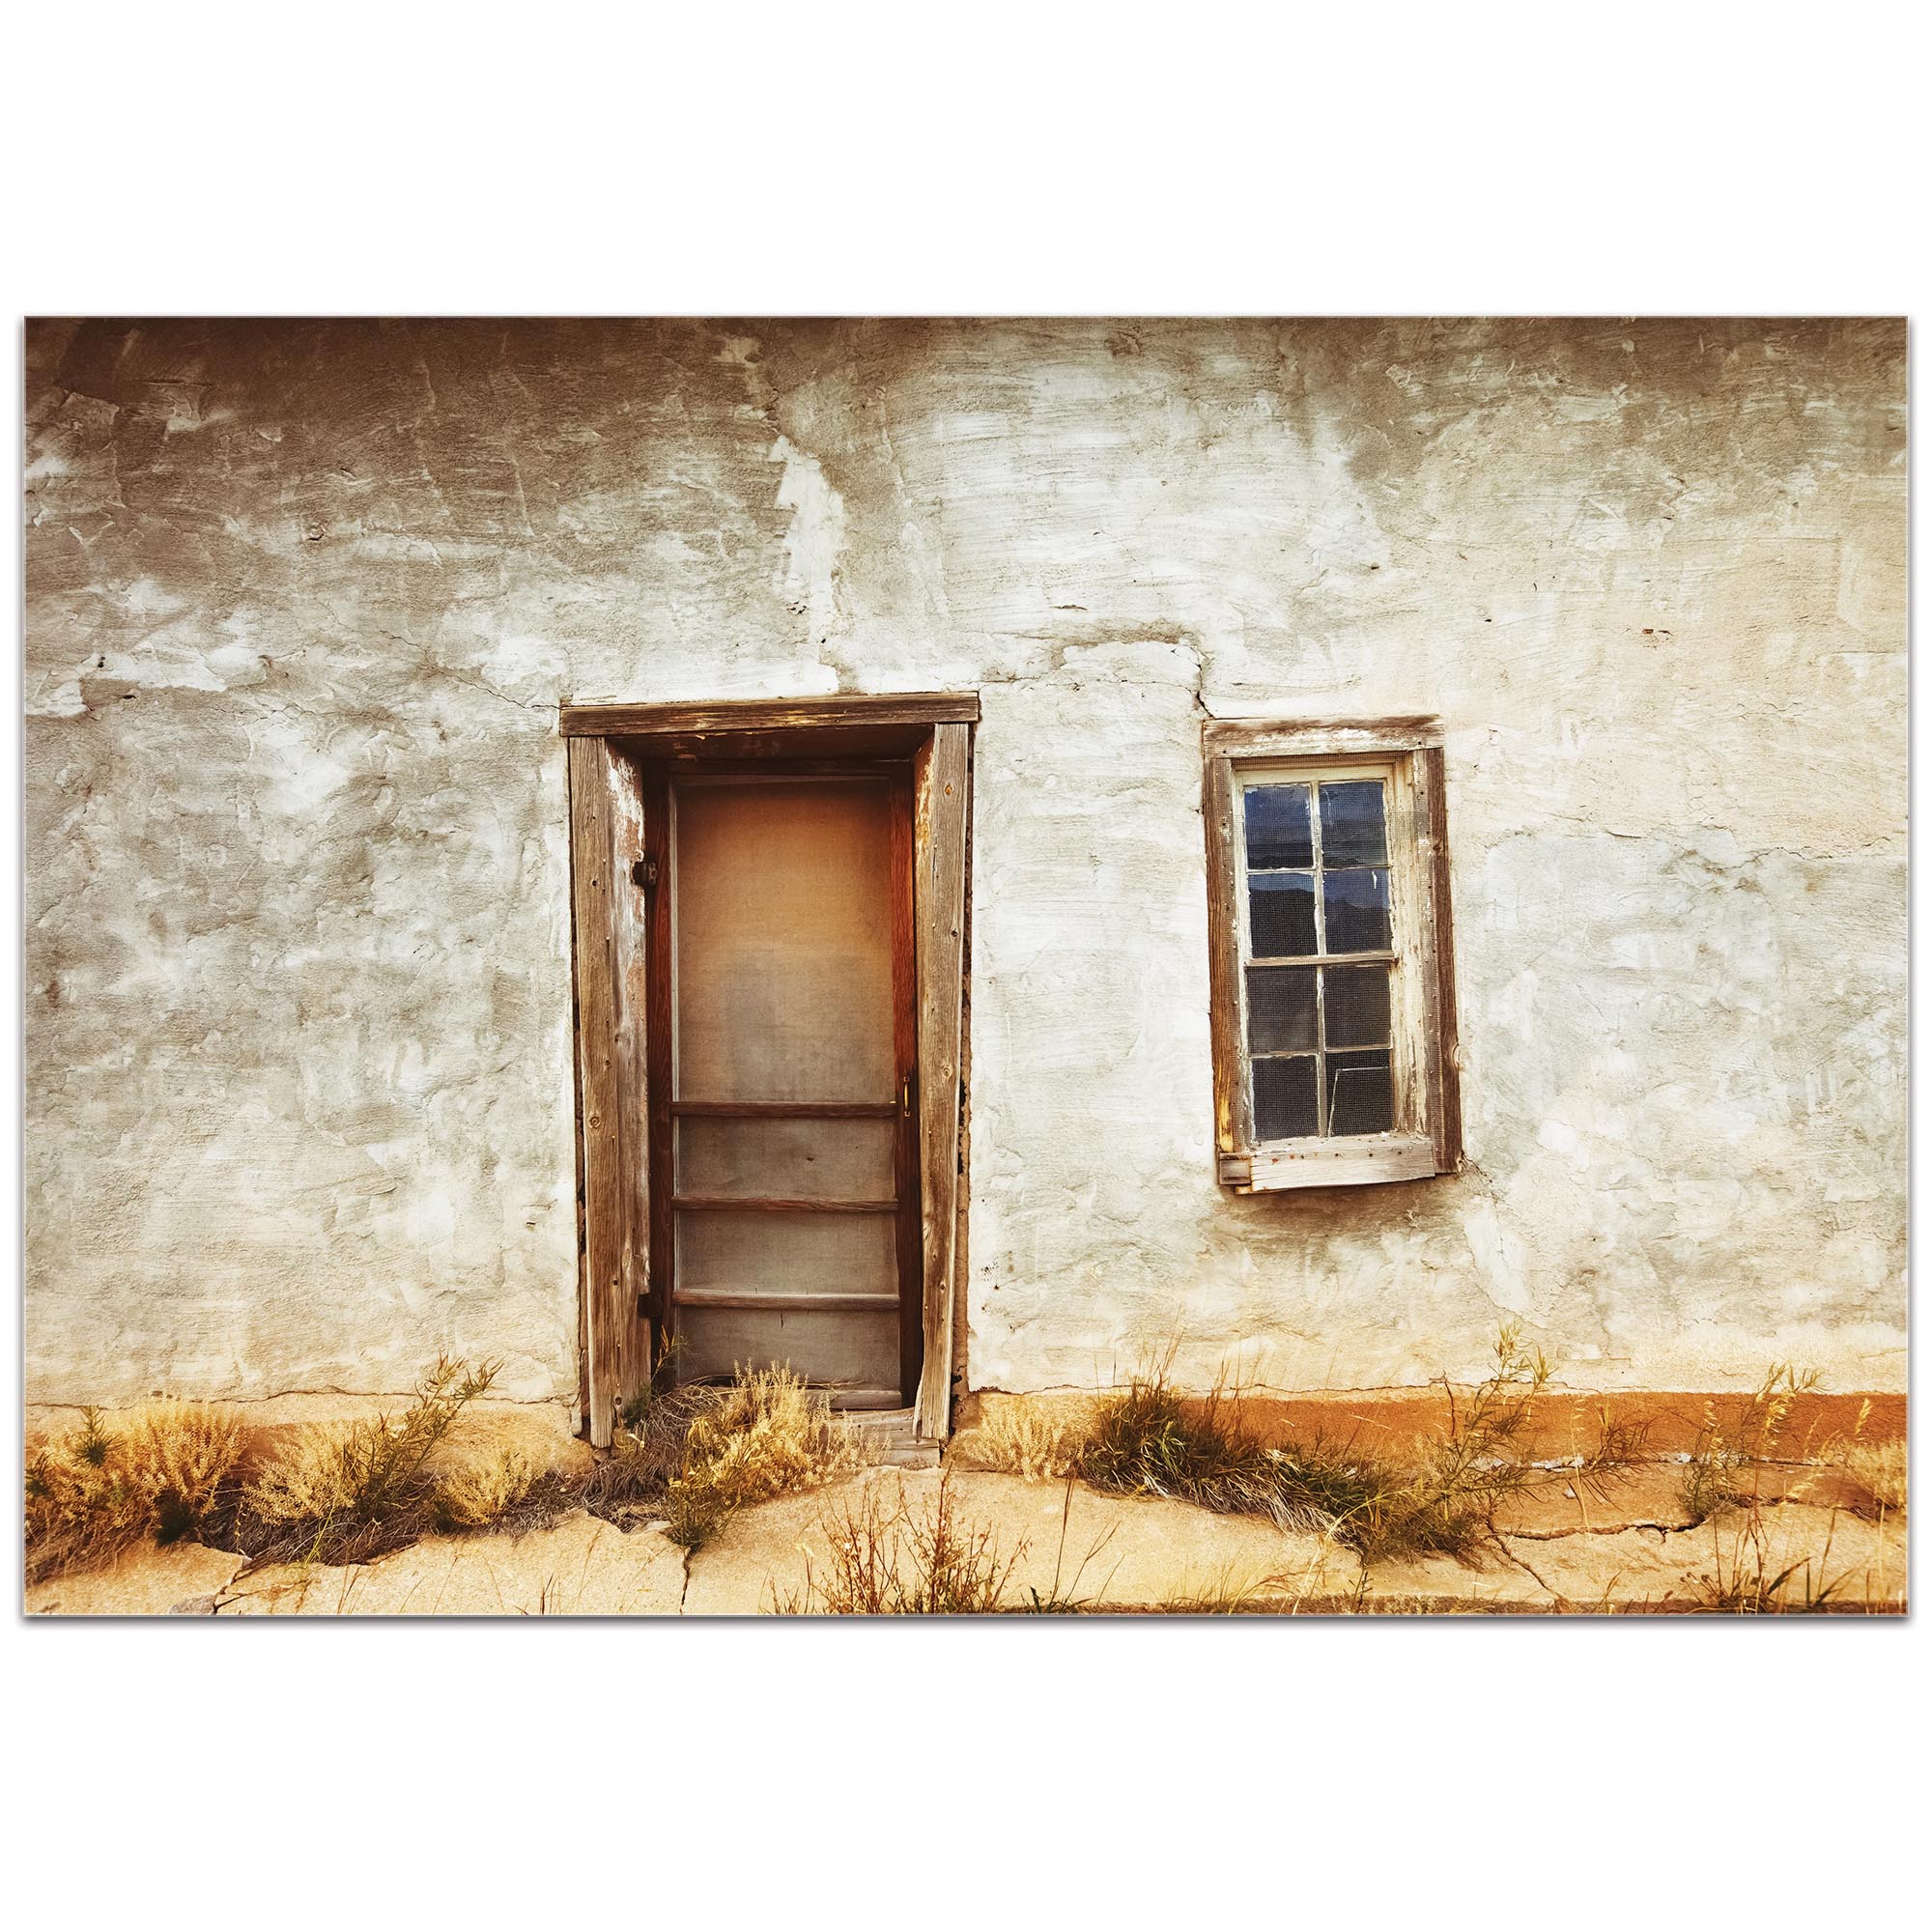 Eclectic Wall Art 'Southern Door' - Architecture Decor on Metal or Plexiglass - Image 2